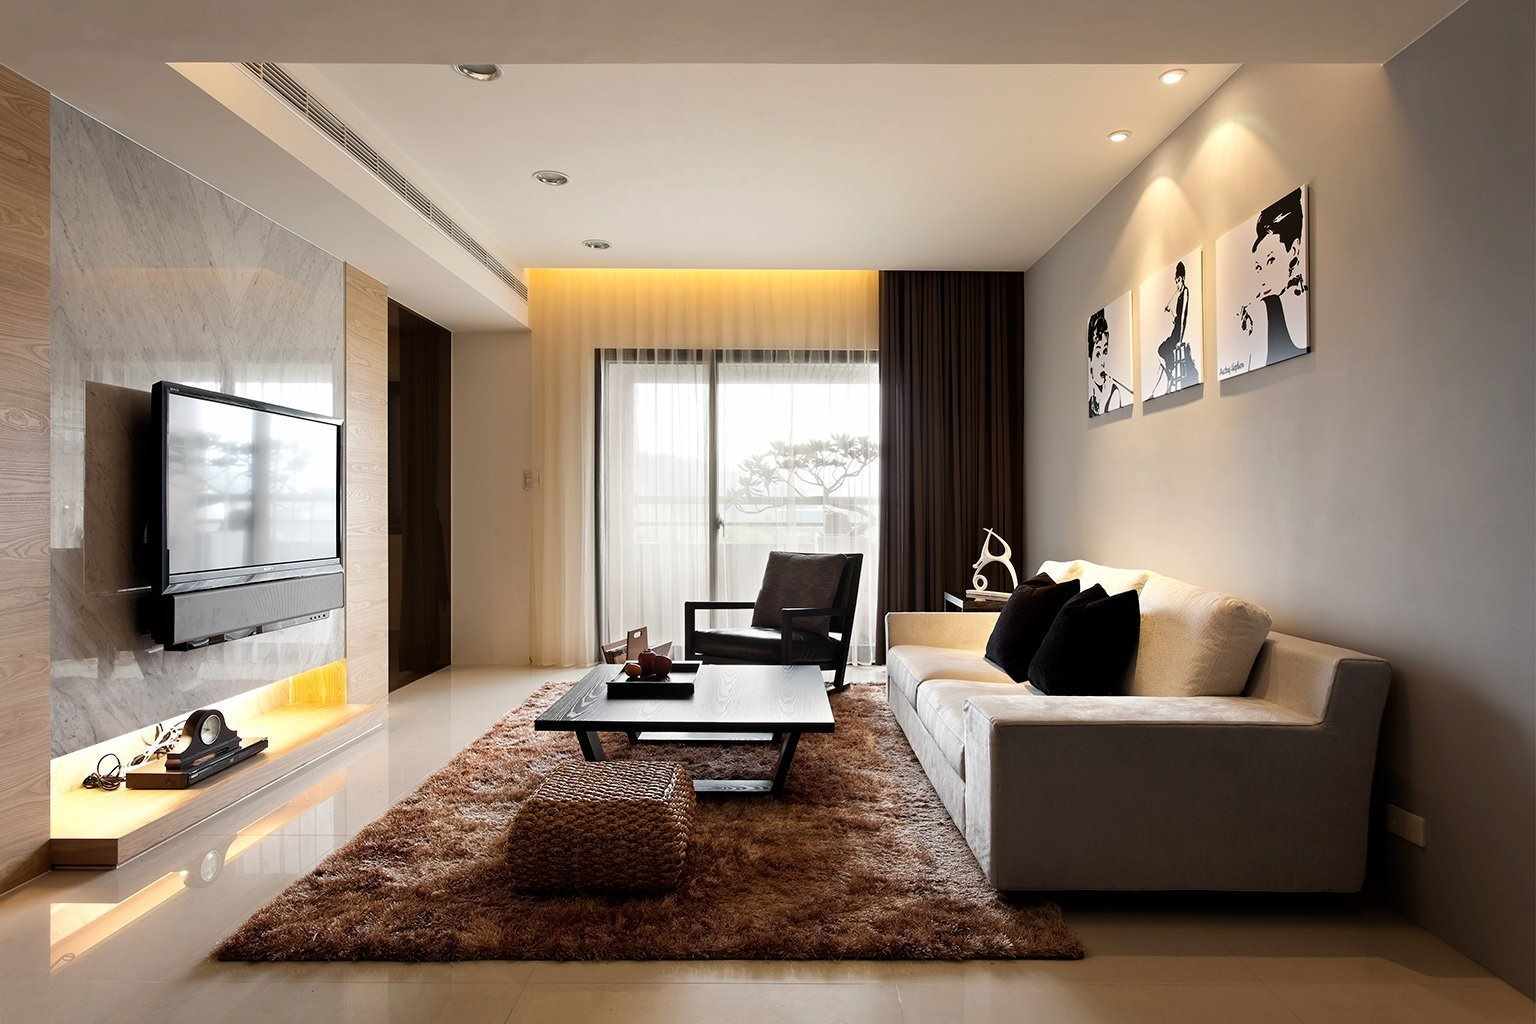 an example of applying an unusual design of a living room in the style of minimalism